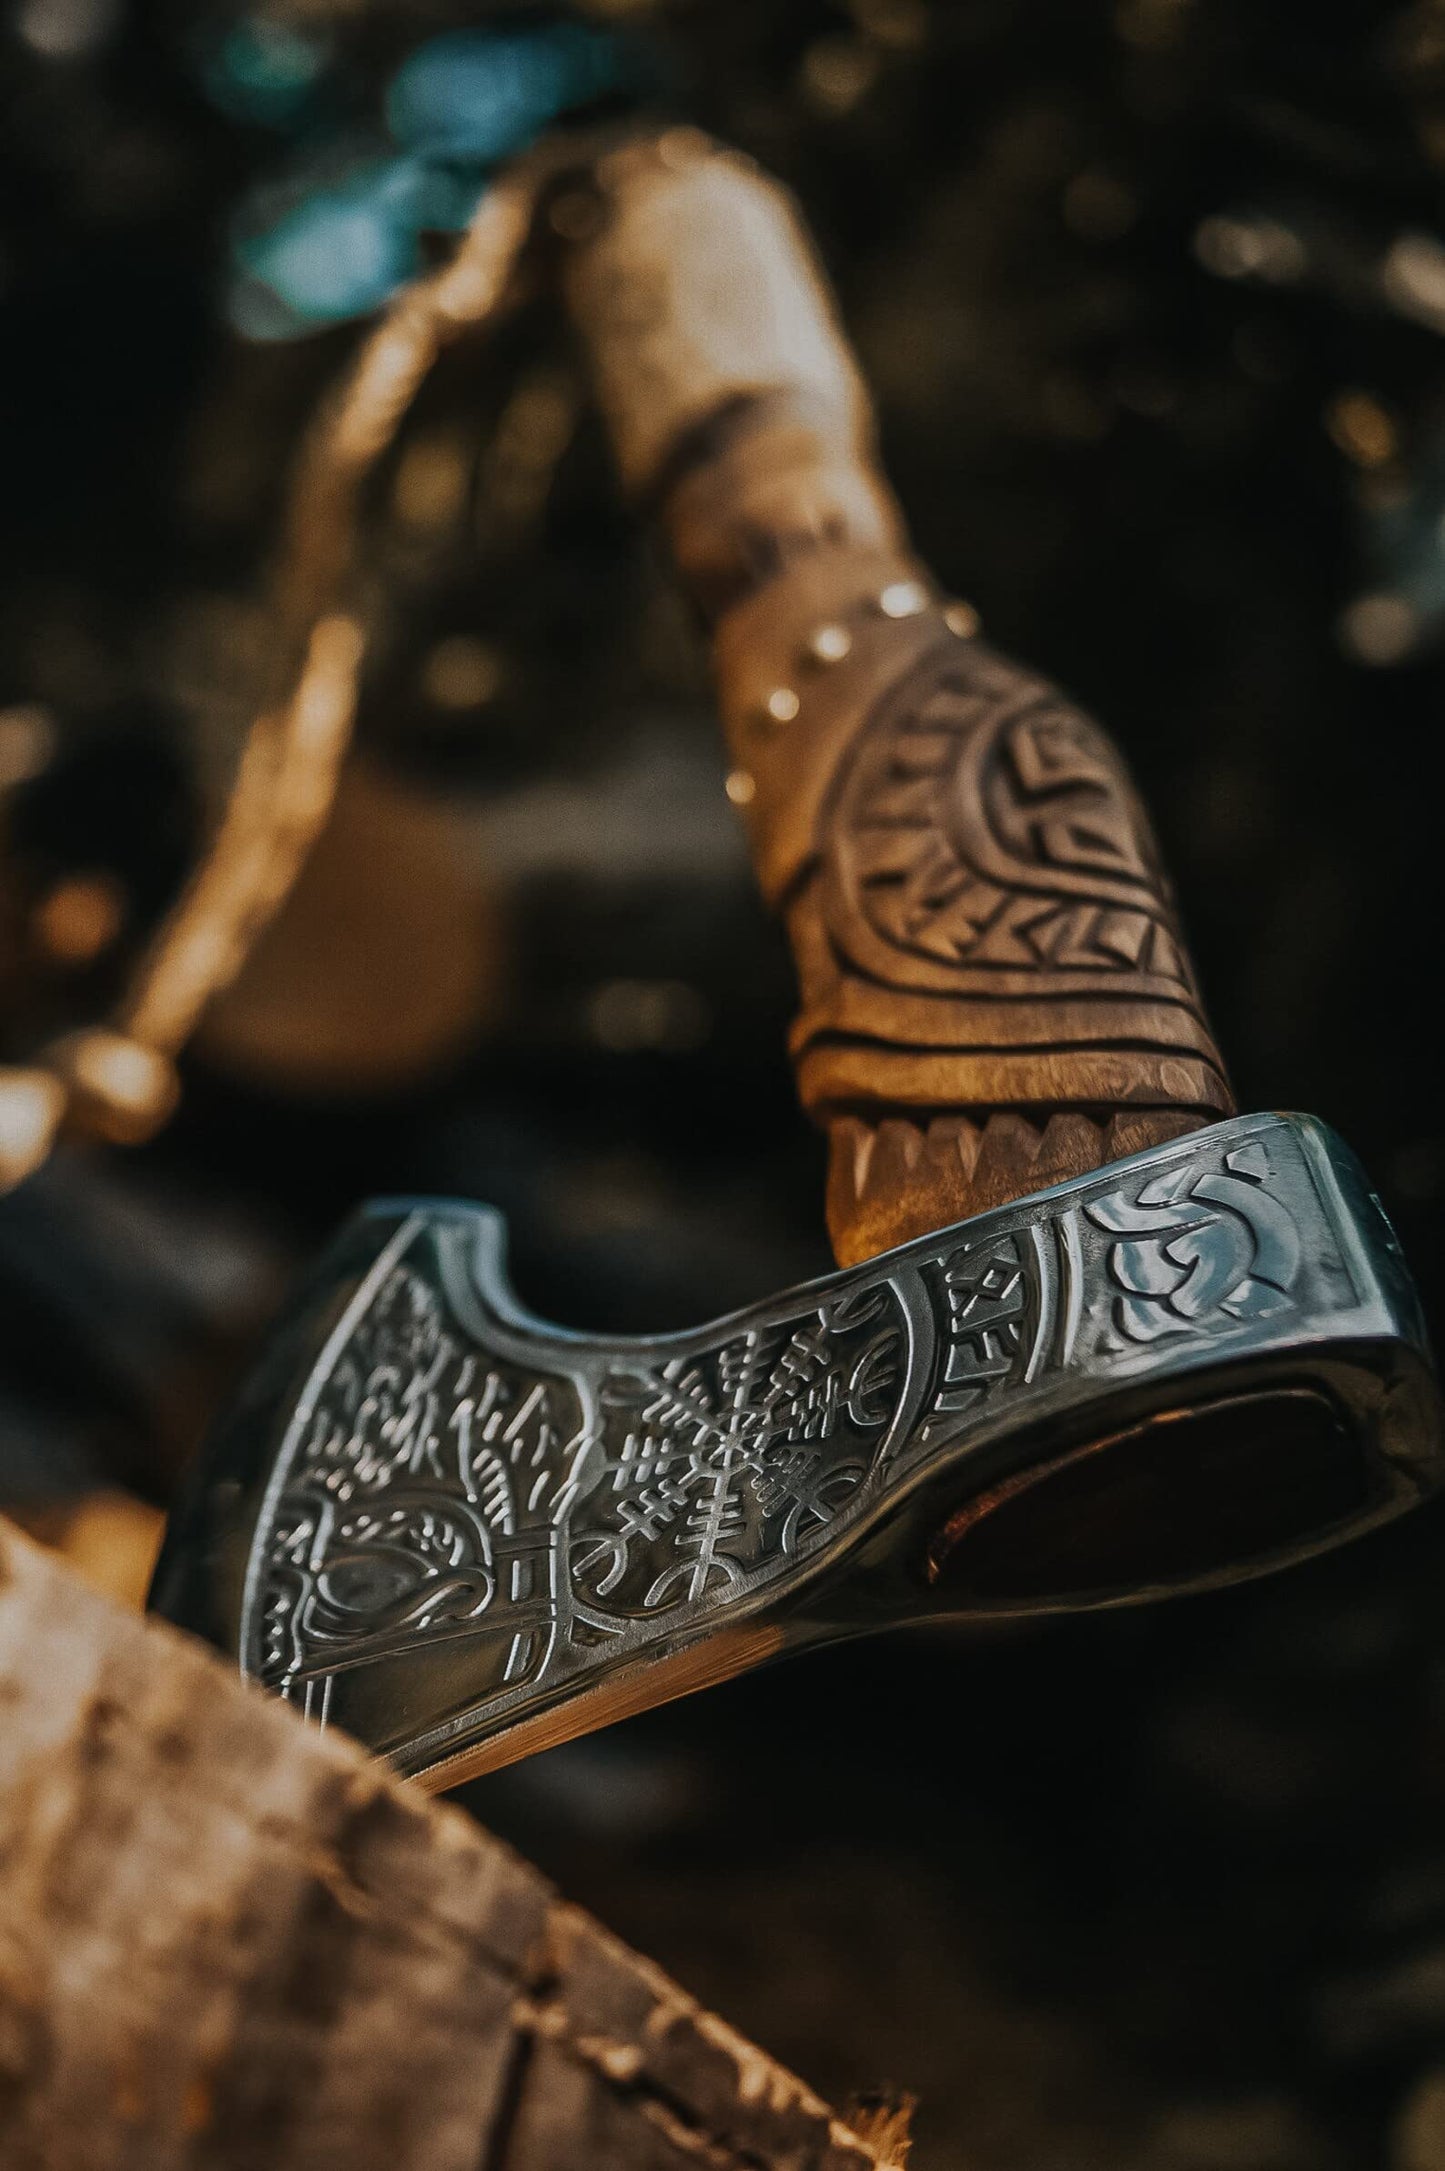 AX-7000 Custom Gift Forged Carbon Steel Viking Axe with Rose Wood Shaft, Viking Bearded Camping Axe (AX-7000) (AX-7000) AX-7000